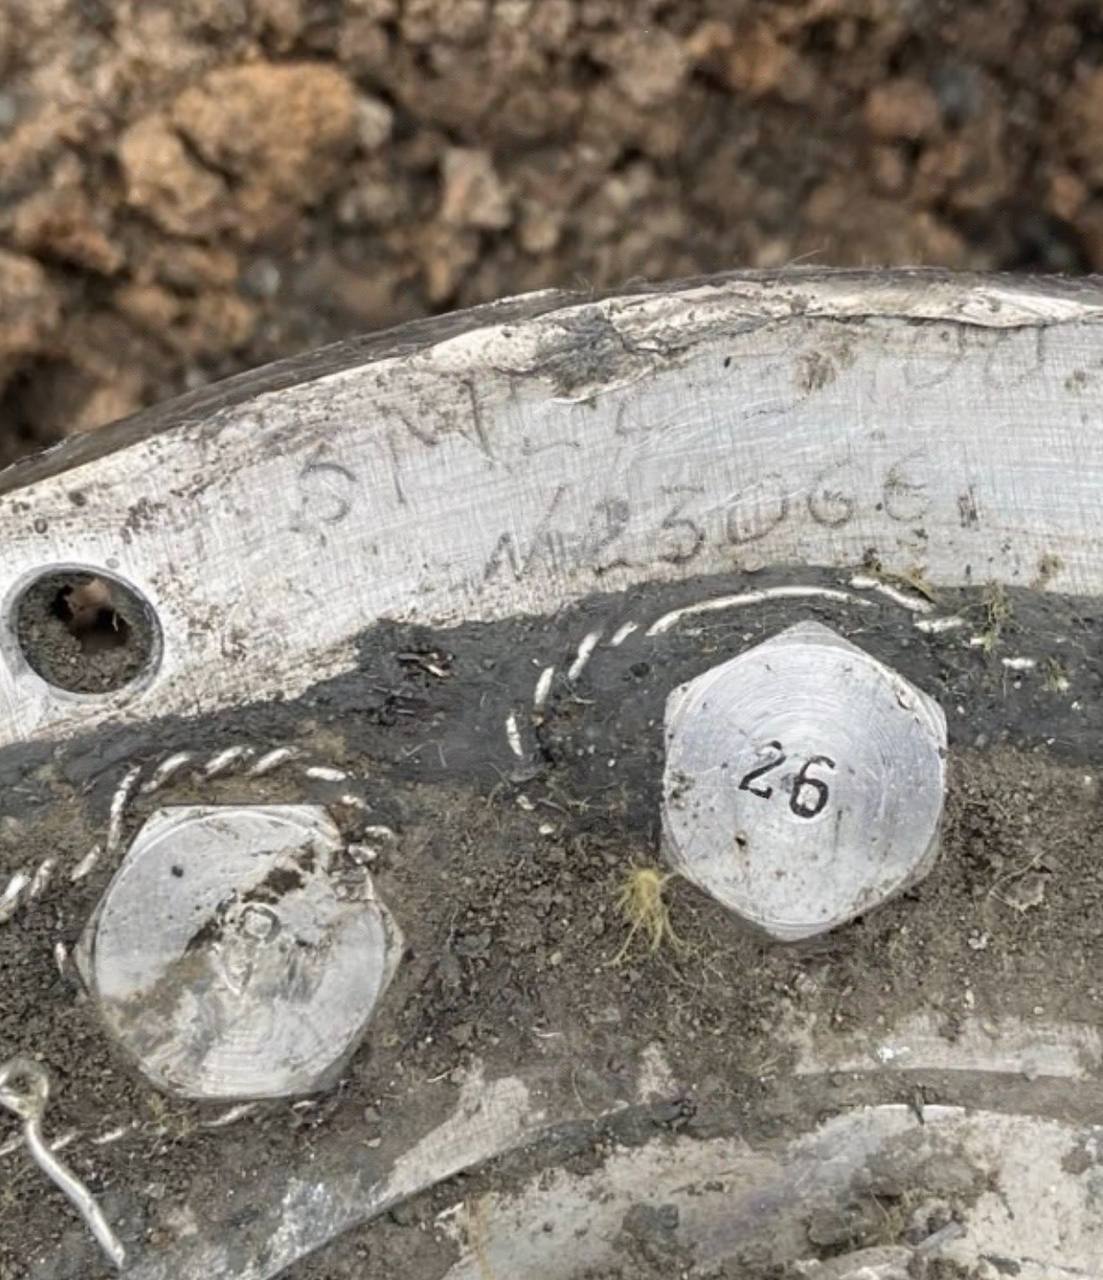 A piece of debris found at the missile crash site with inscriptions indicating it belongs to a 3M22 Zircon missile